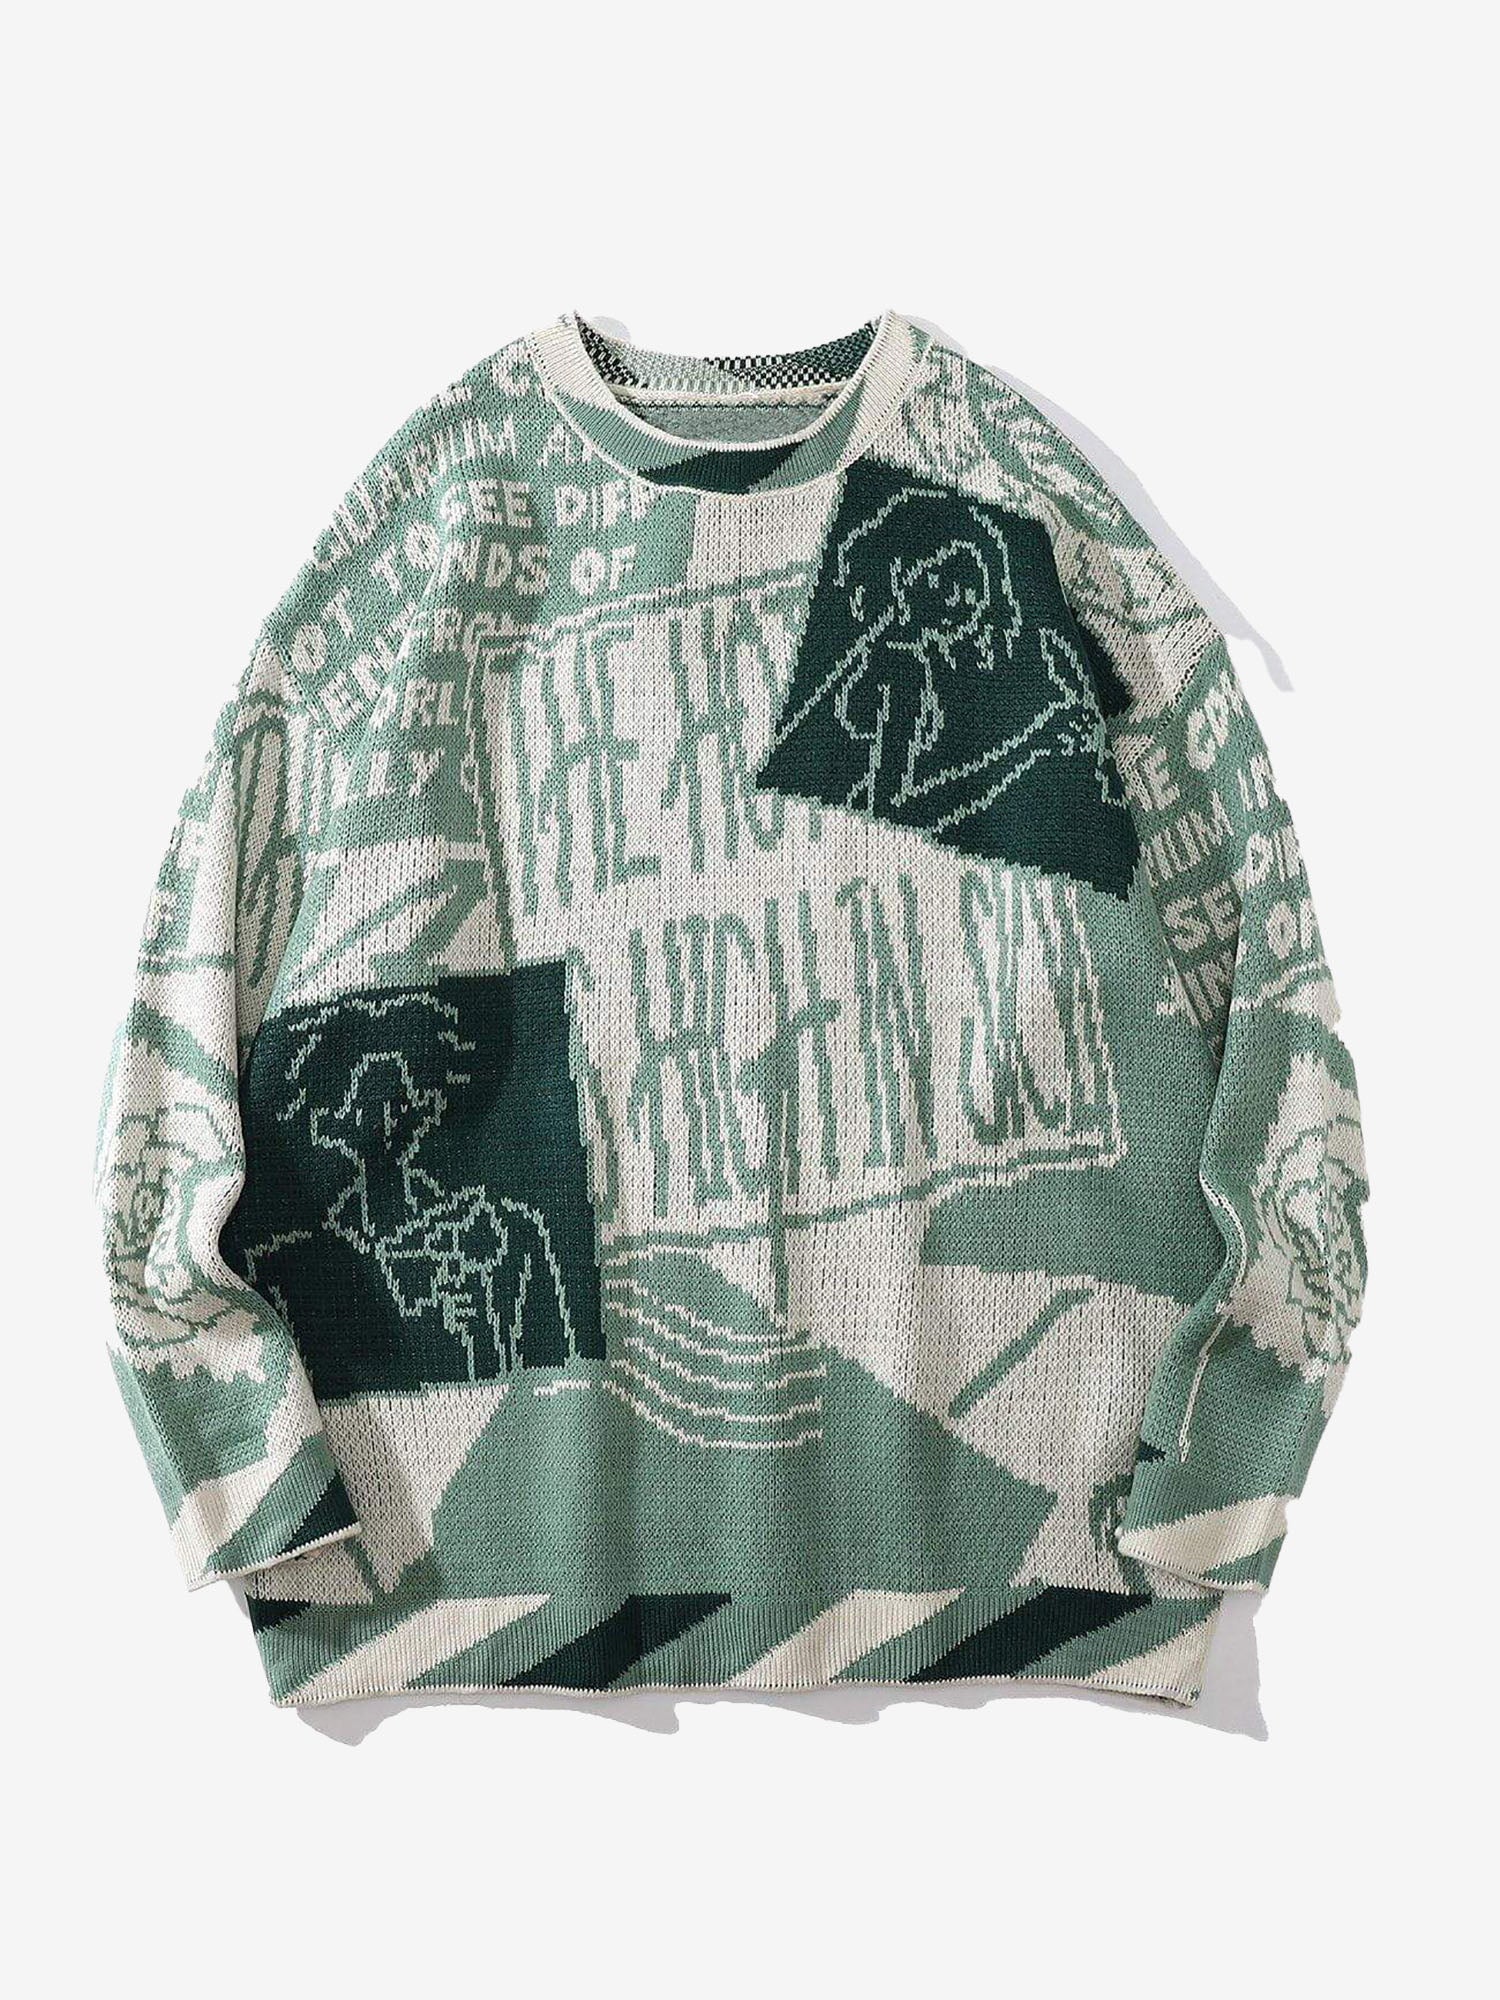 JUSTNOTAG Sketch Illustration Graphic Knitted Sweater